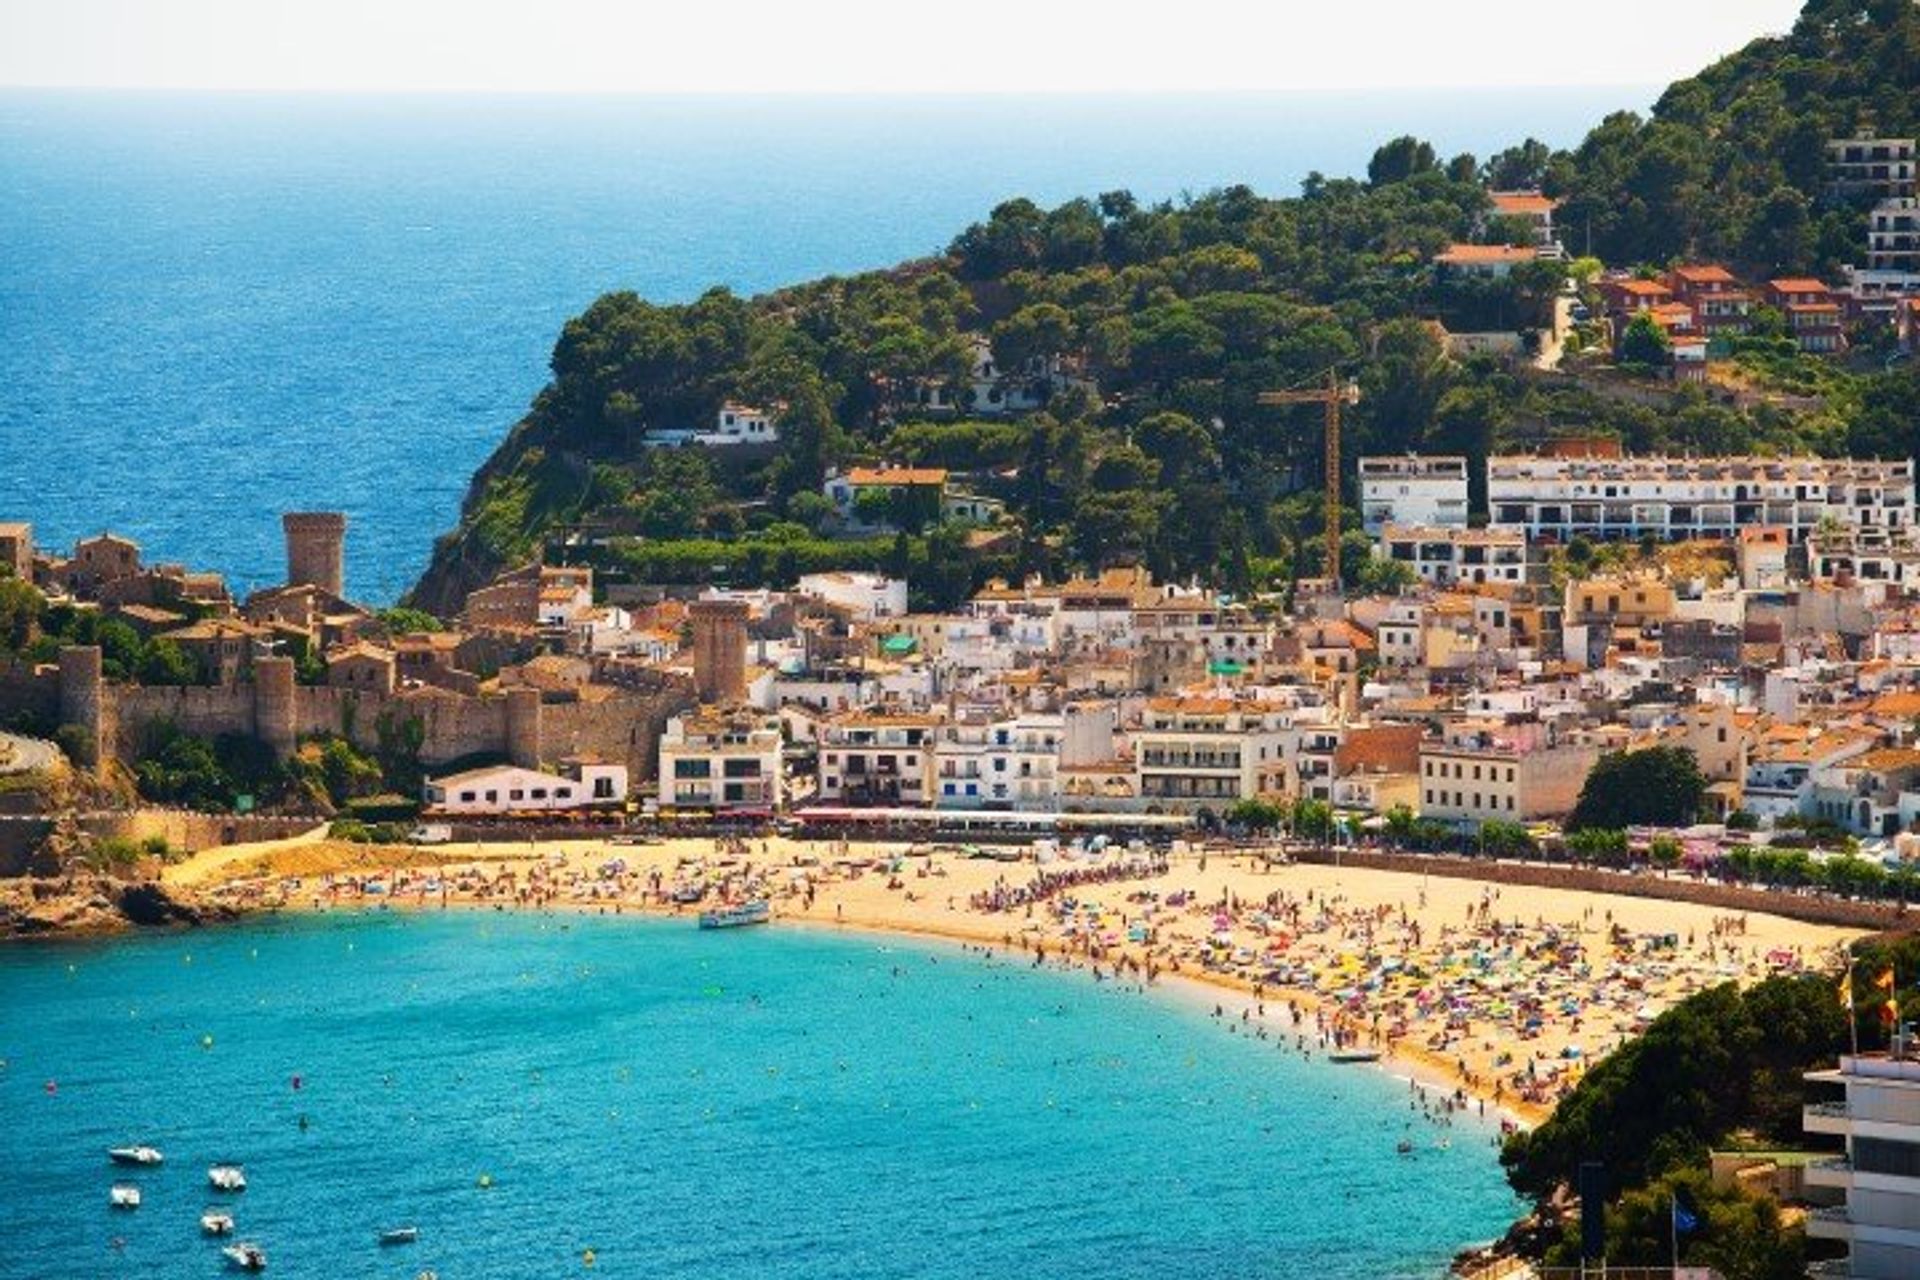 Tossa de Mar's beaches are packed and lively, with a beautiful backdrop of forestry and ancient remains